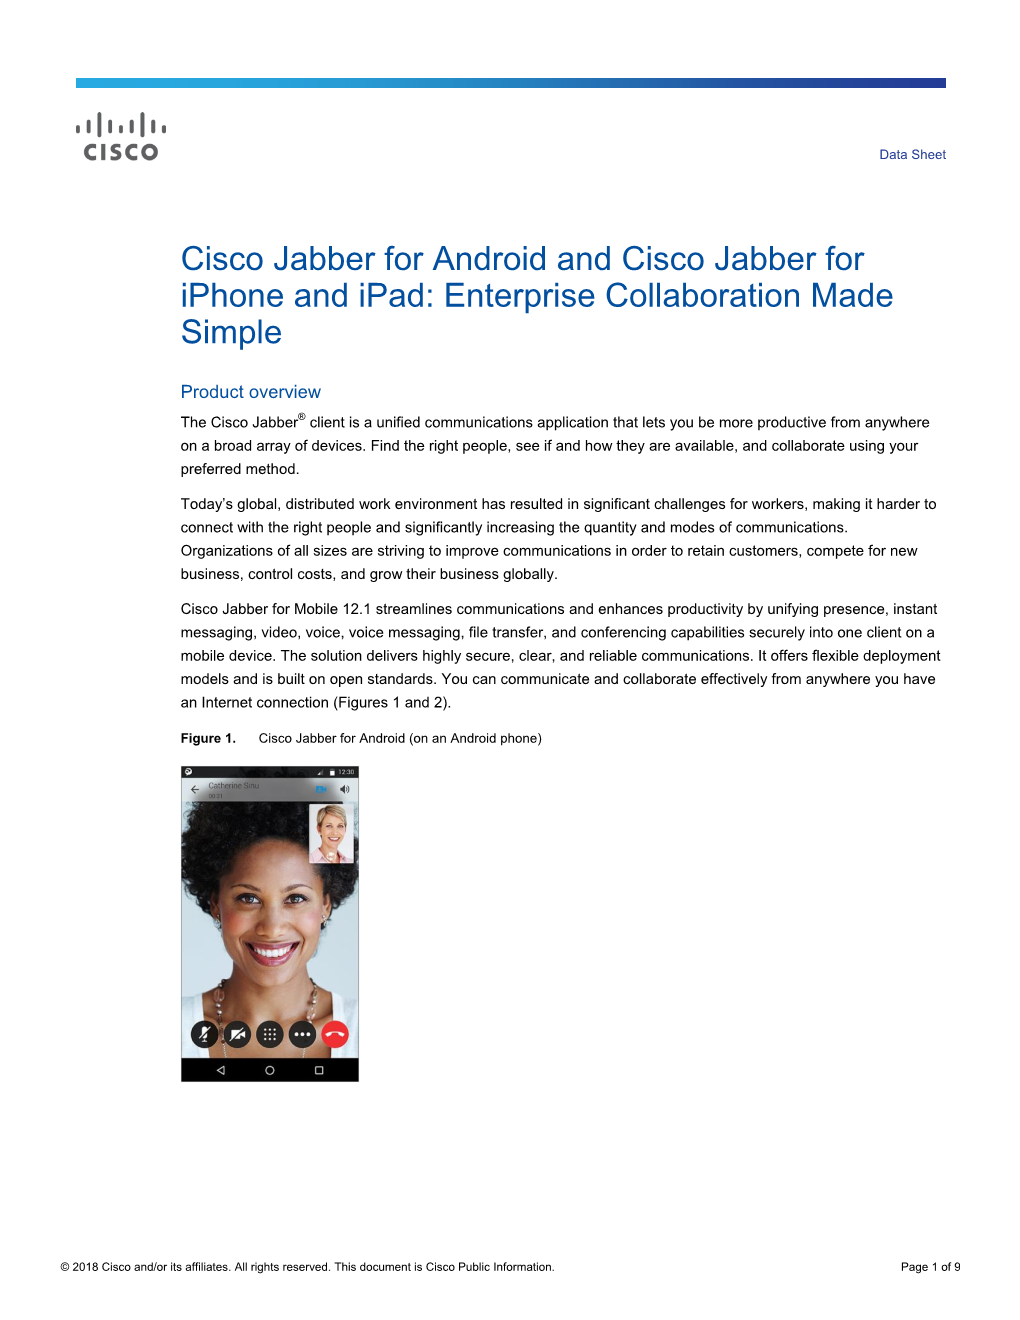 Cisco Jabber for Android and Cisco Jabber for Iphone and Ipad: Enterprise Collaboration Made Simple